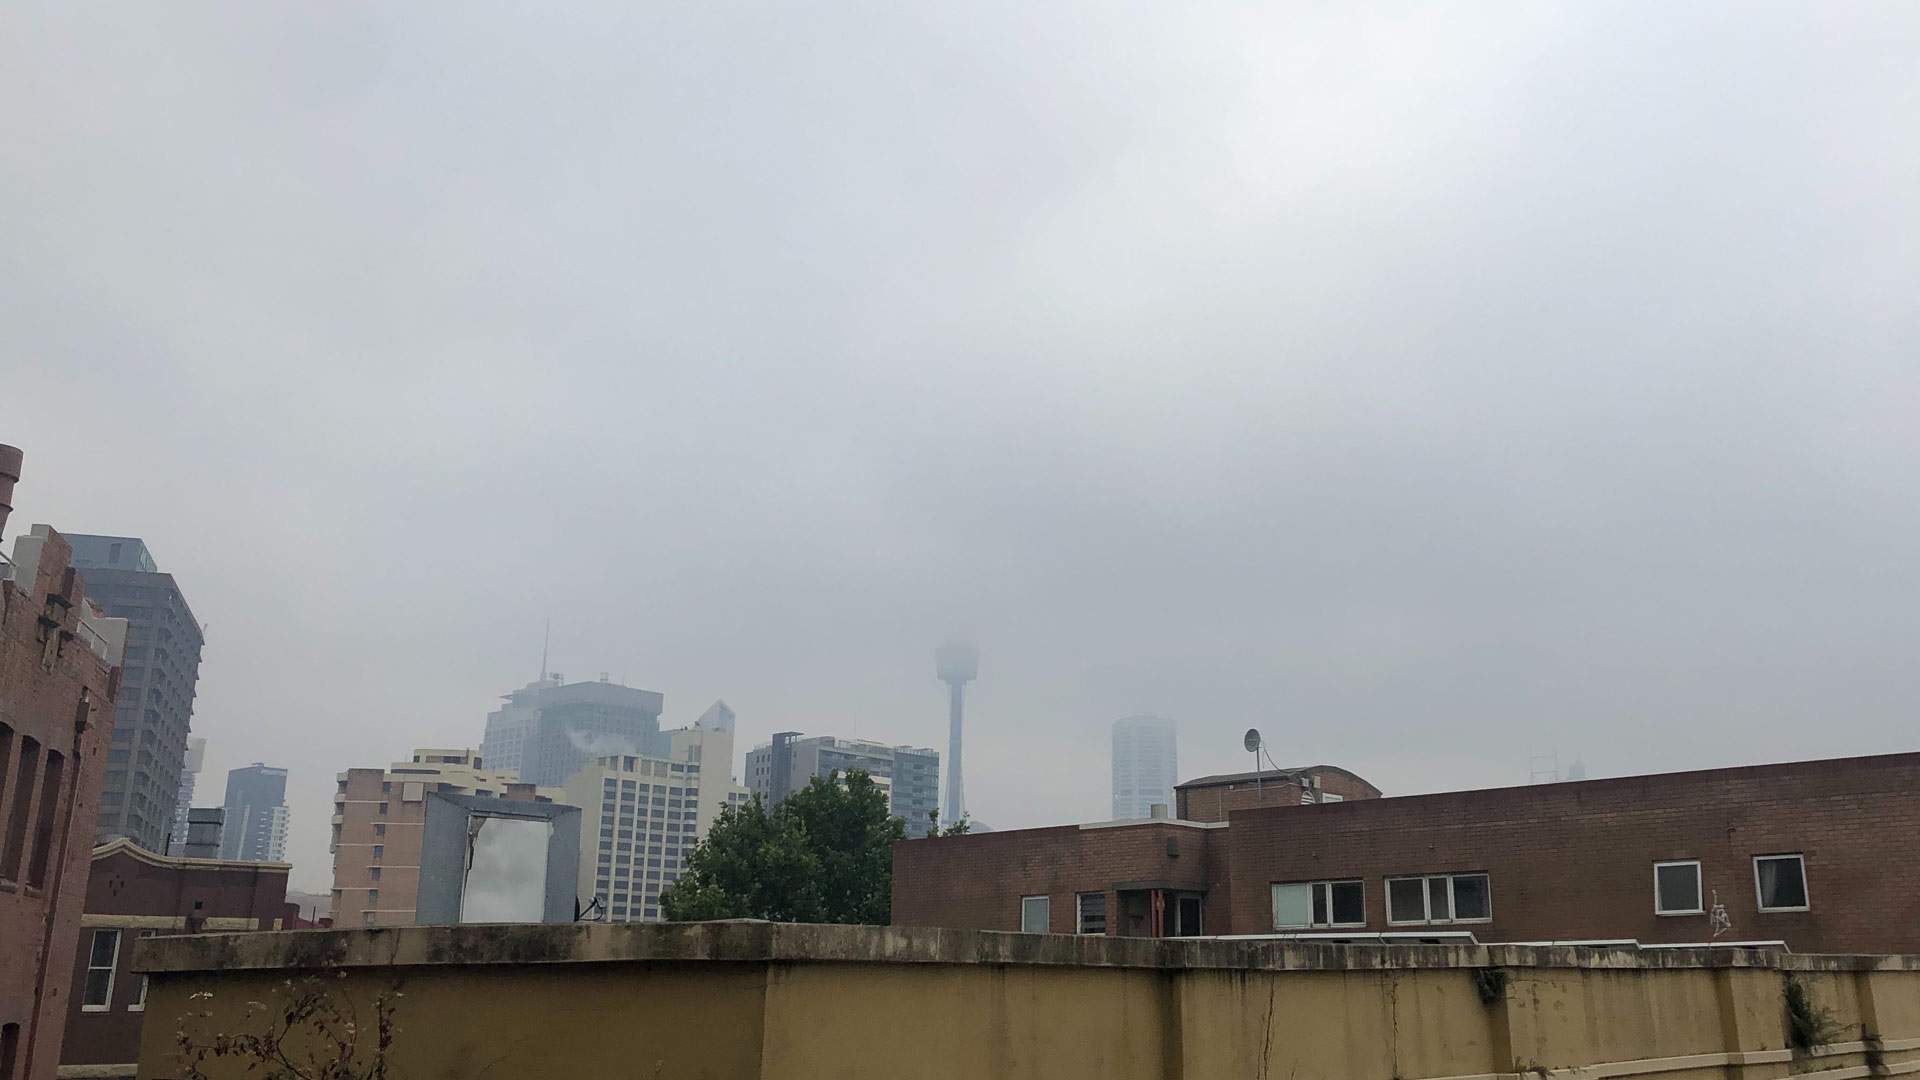 A Haze of "Hazardous" Smoke Is Currently Affecting the Air Quality in Sydney